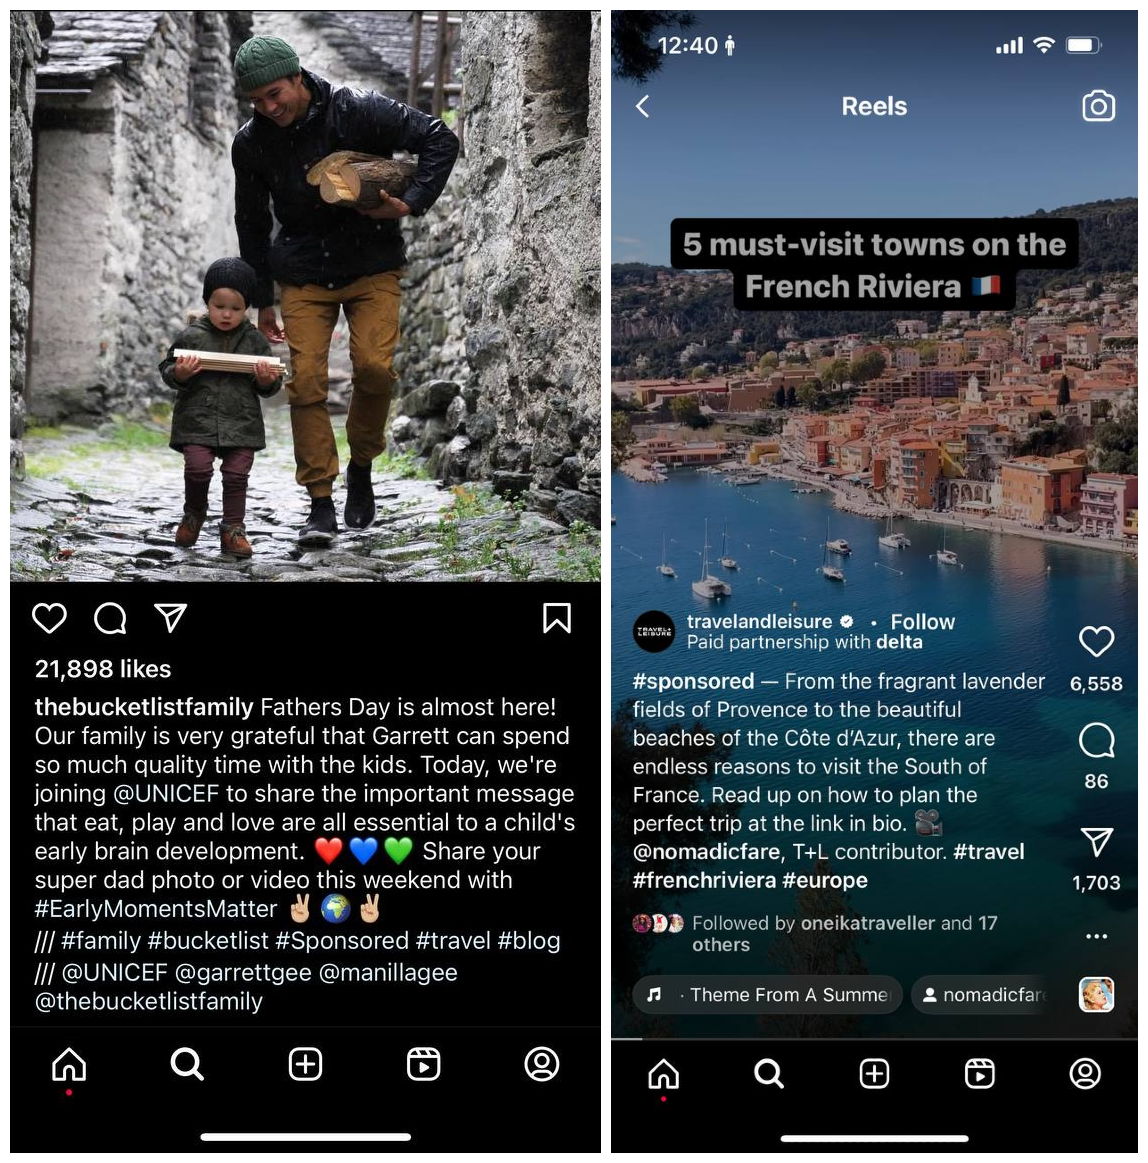 Screenshots featuring examples of Sponsored content from thebucketlistfamily and Travelandleisure 